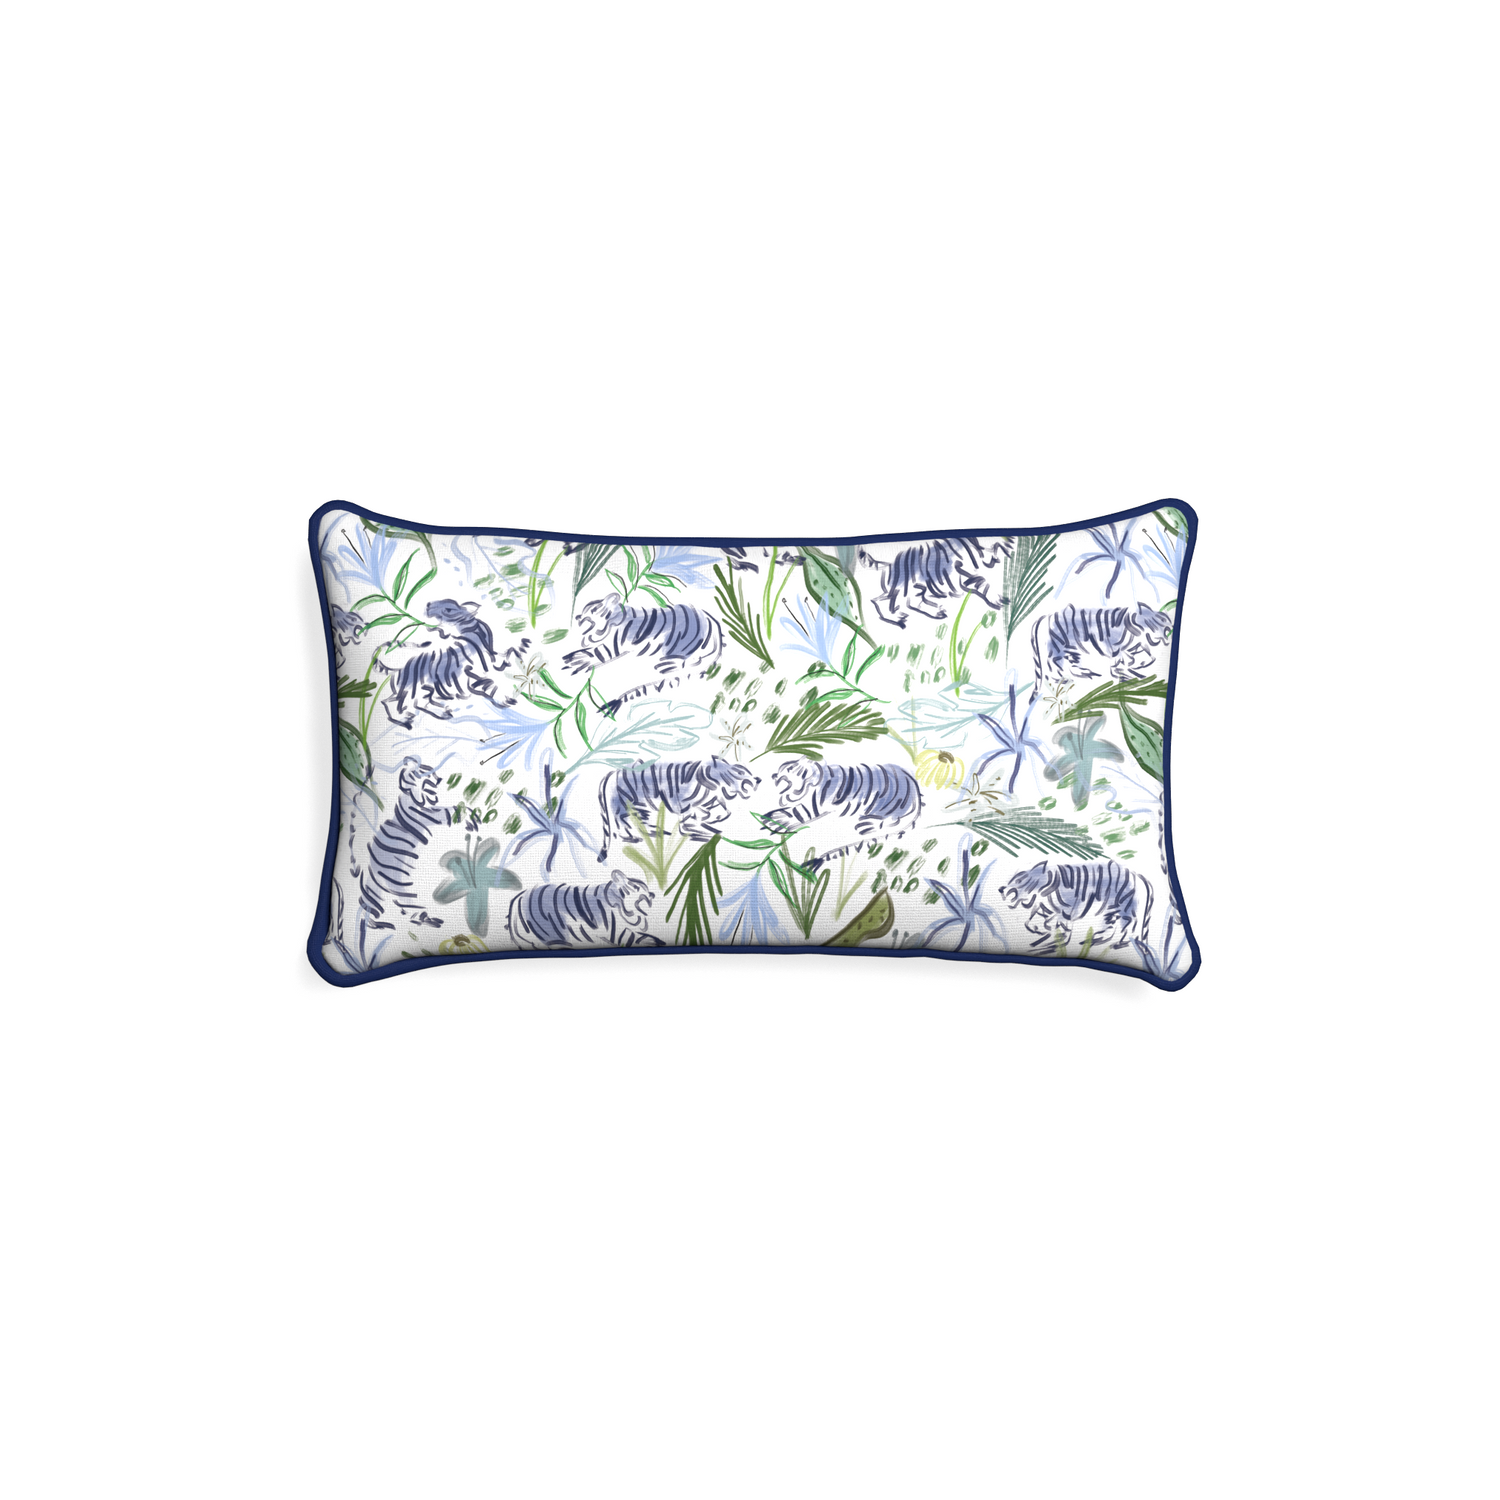 Petite-lumbar frida green custom green tigerpillow with midnight piping on white background